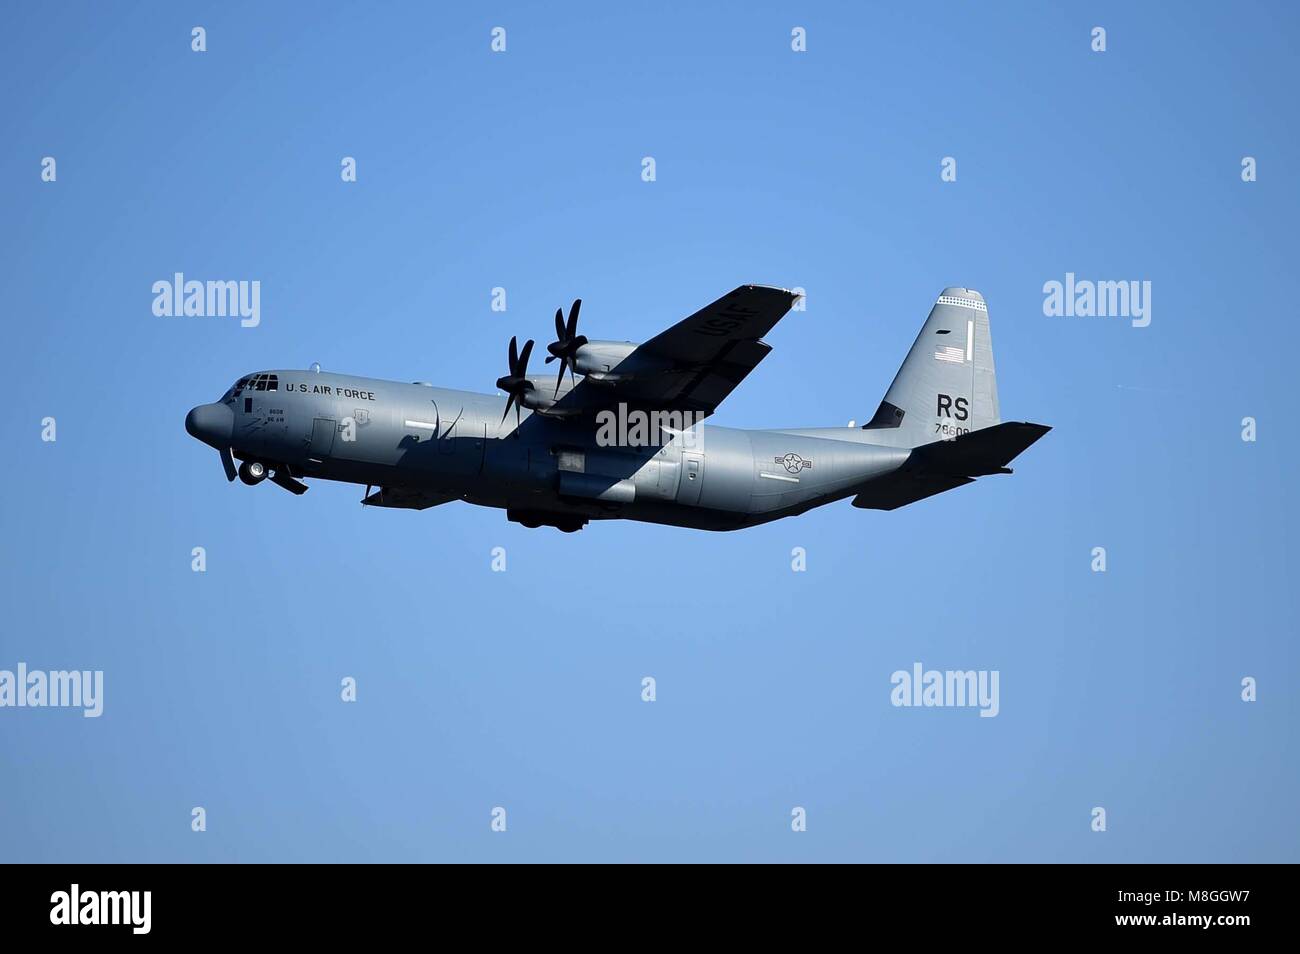 A C-130J Super Hercules from Ramstein Air Base, Germany takes-off Mar. 12, 2018 from Little Rock Air Force Base, Ark. Team Little Rock hosted over 65 Airmen from six wings to train together and showcase tactical airlift. Partnerships and interoperability enhance operational effectiveness and mission readiness. (U.S. Air Force photo by Staff Sgt. Dana J. Cable) Stock Photo